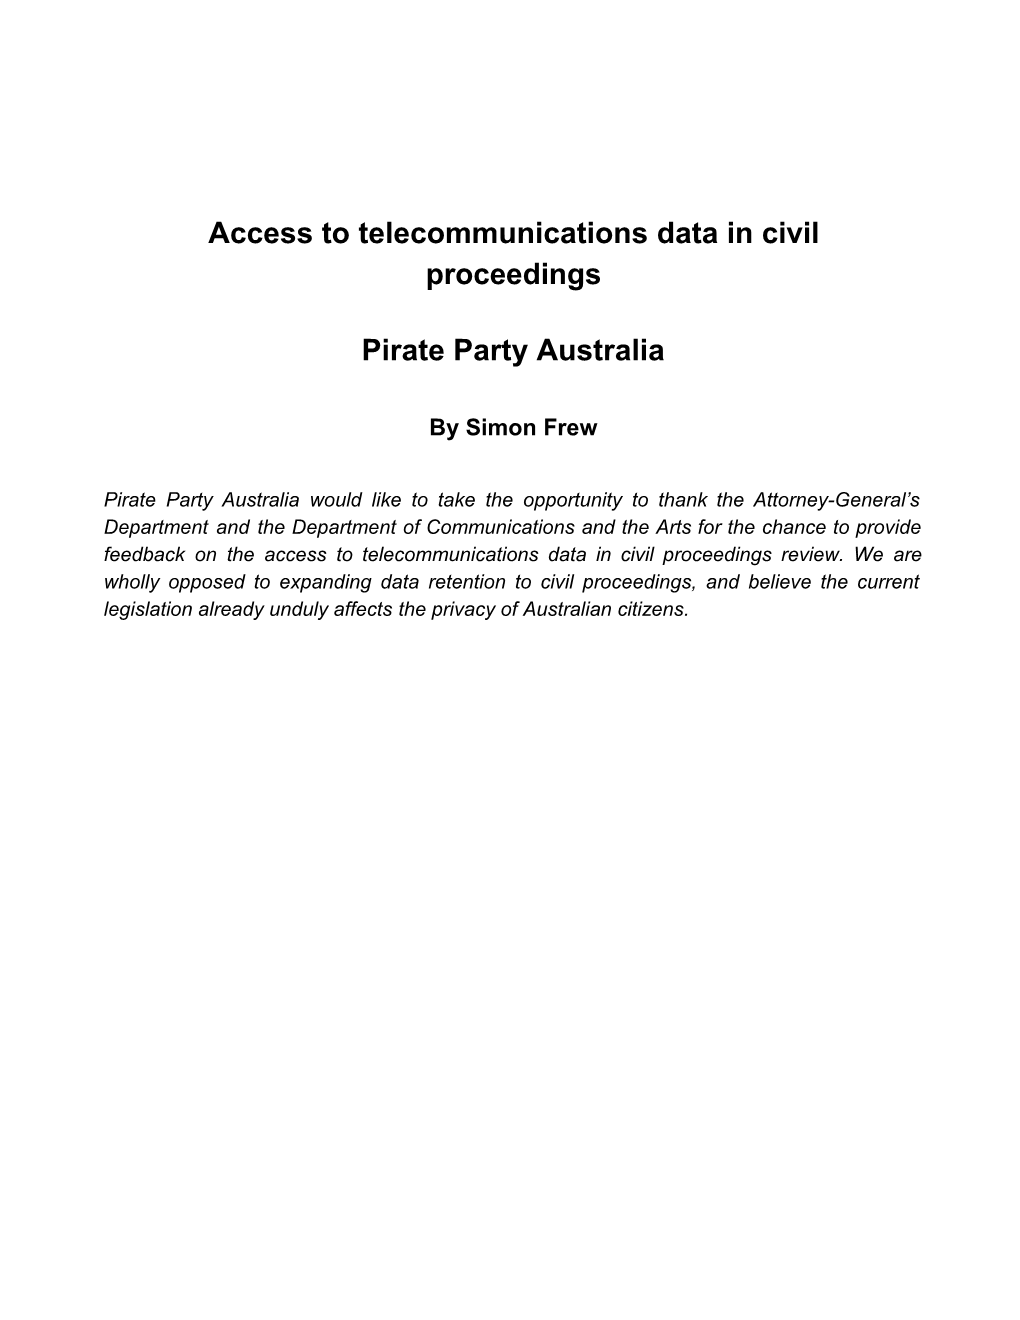 Section 280 Submission Pirate Party